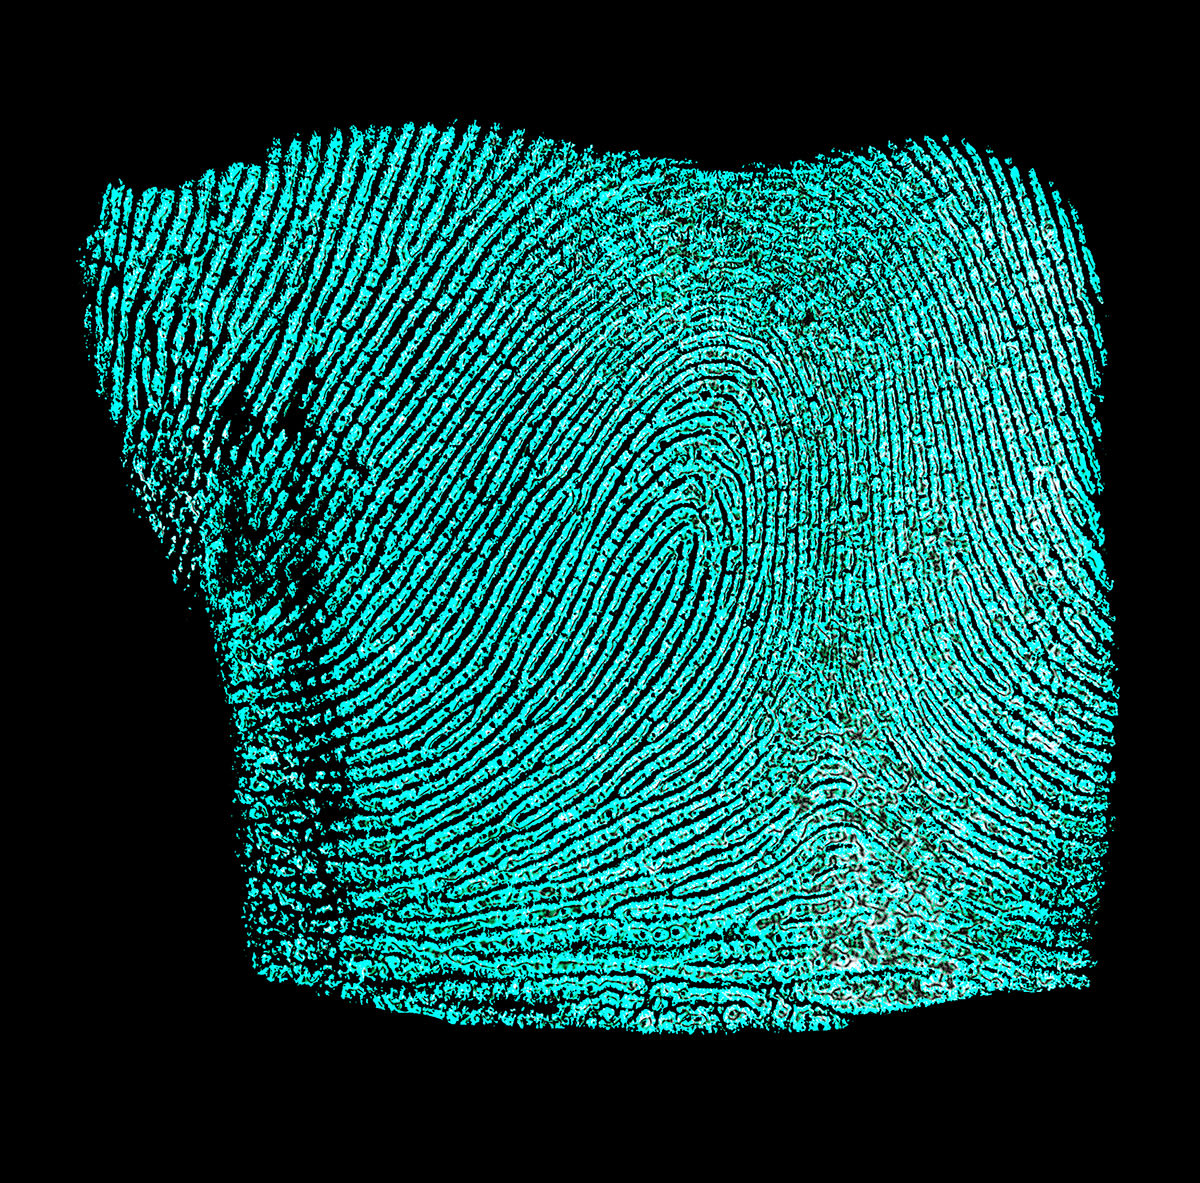 Do You Have What It Takes to be a Forensic Fingerprint Examiner?